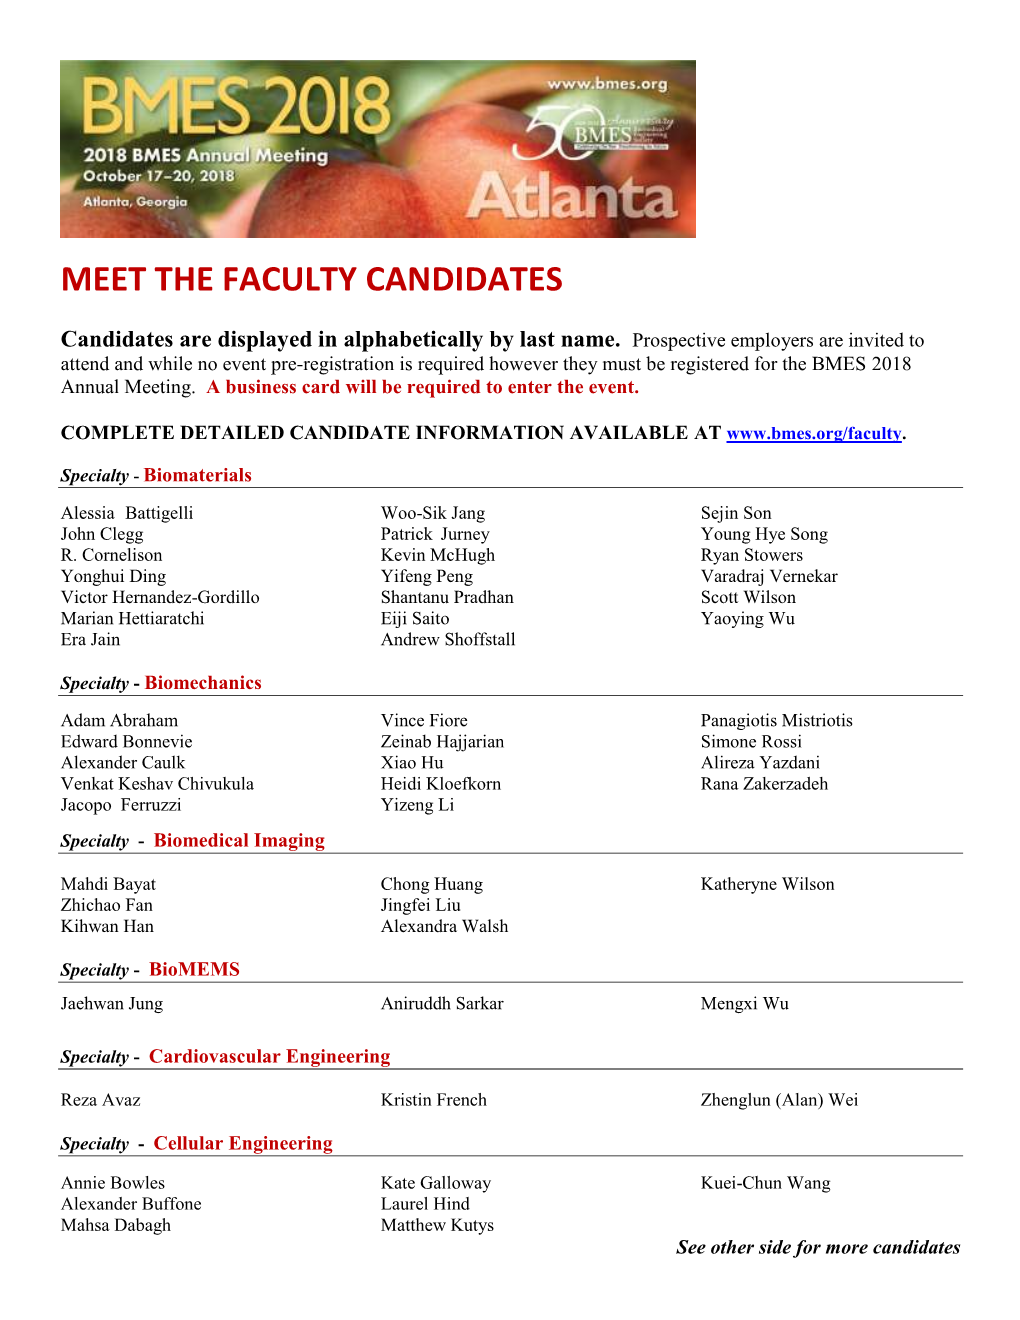 Meet the Faculty Candidates